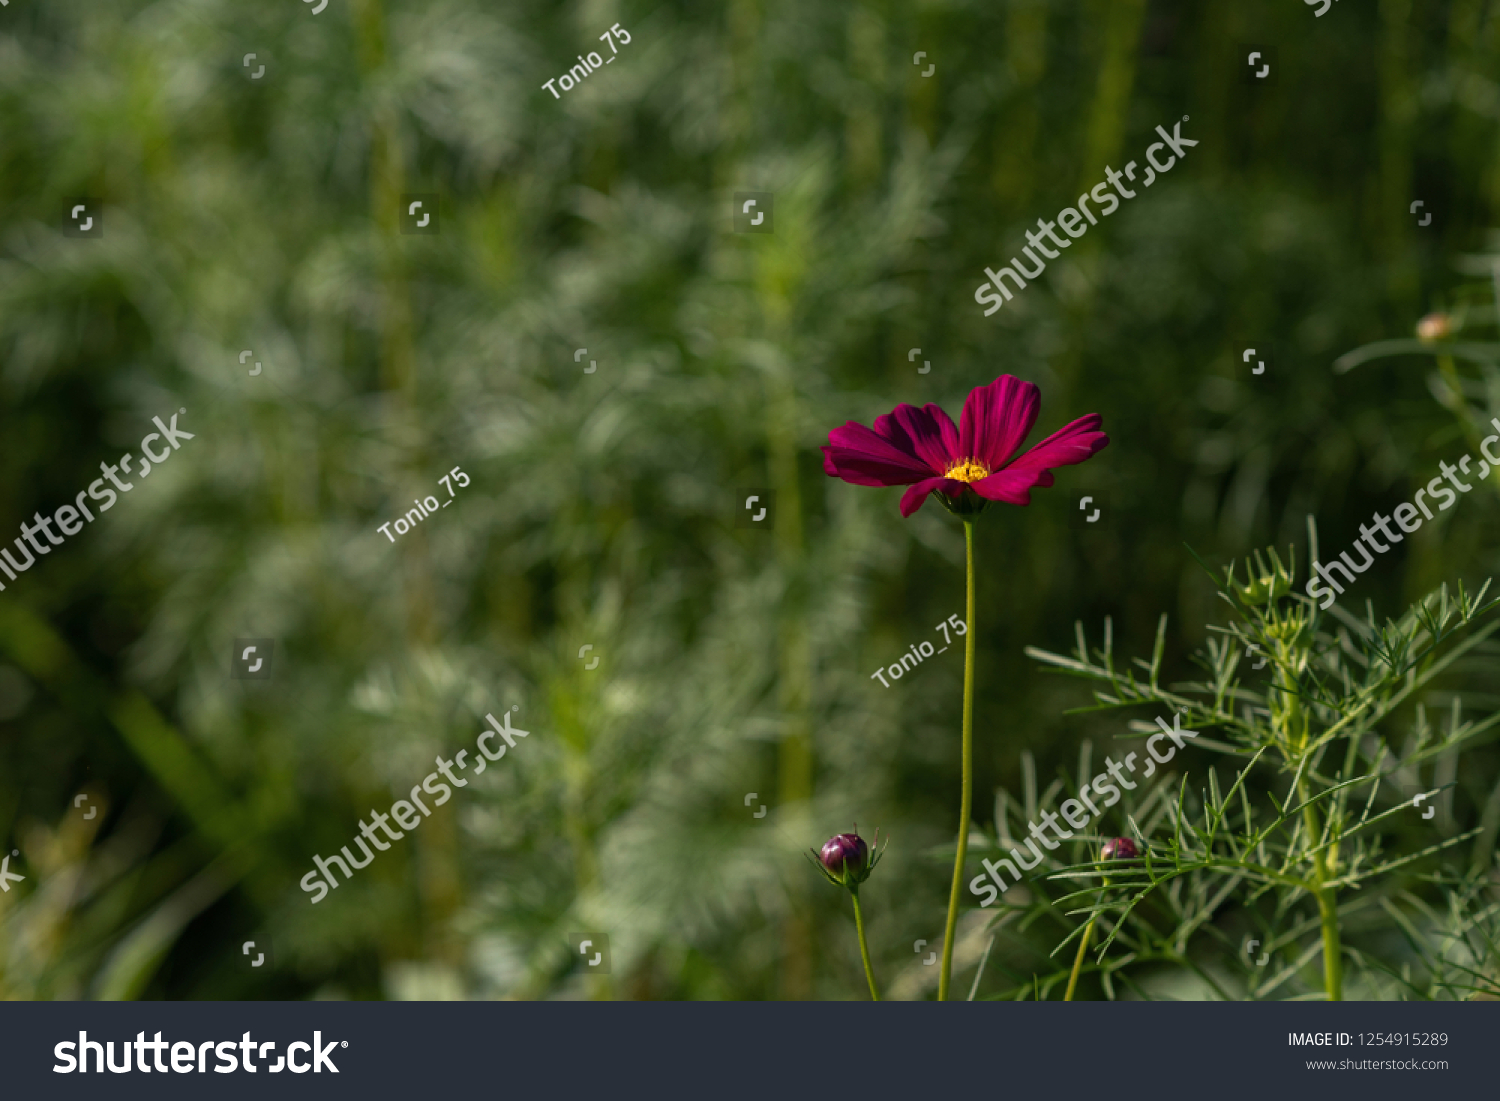 Focus on a burgundy cosmos flower on a blurred and dynamic green background #1254915289